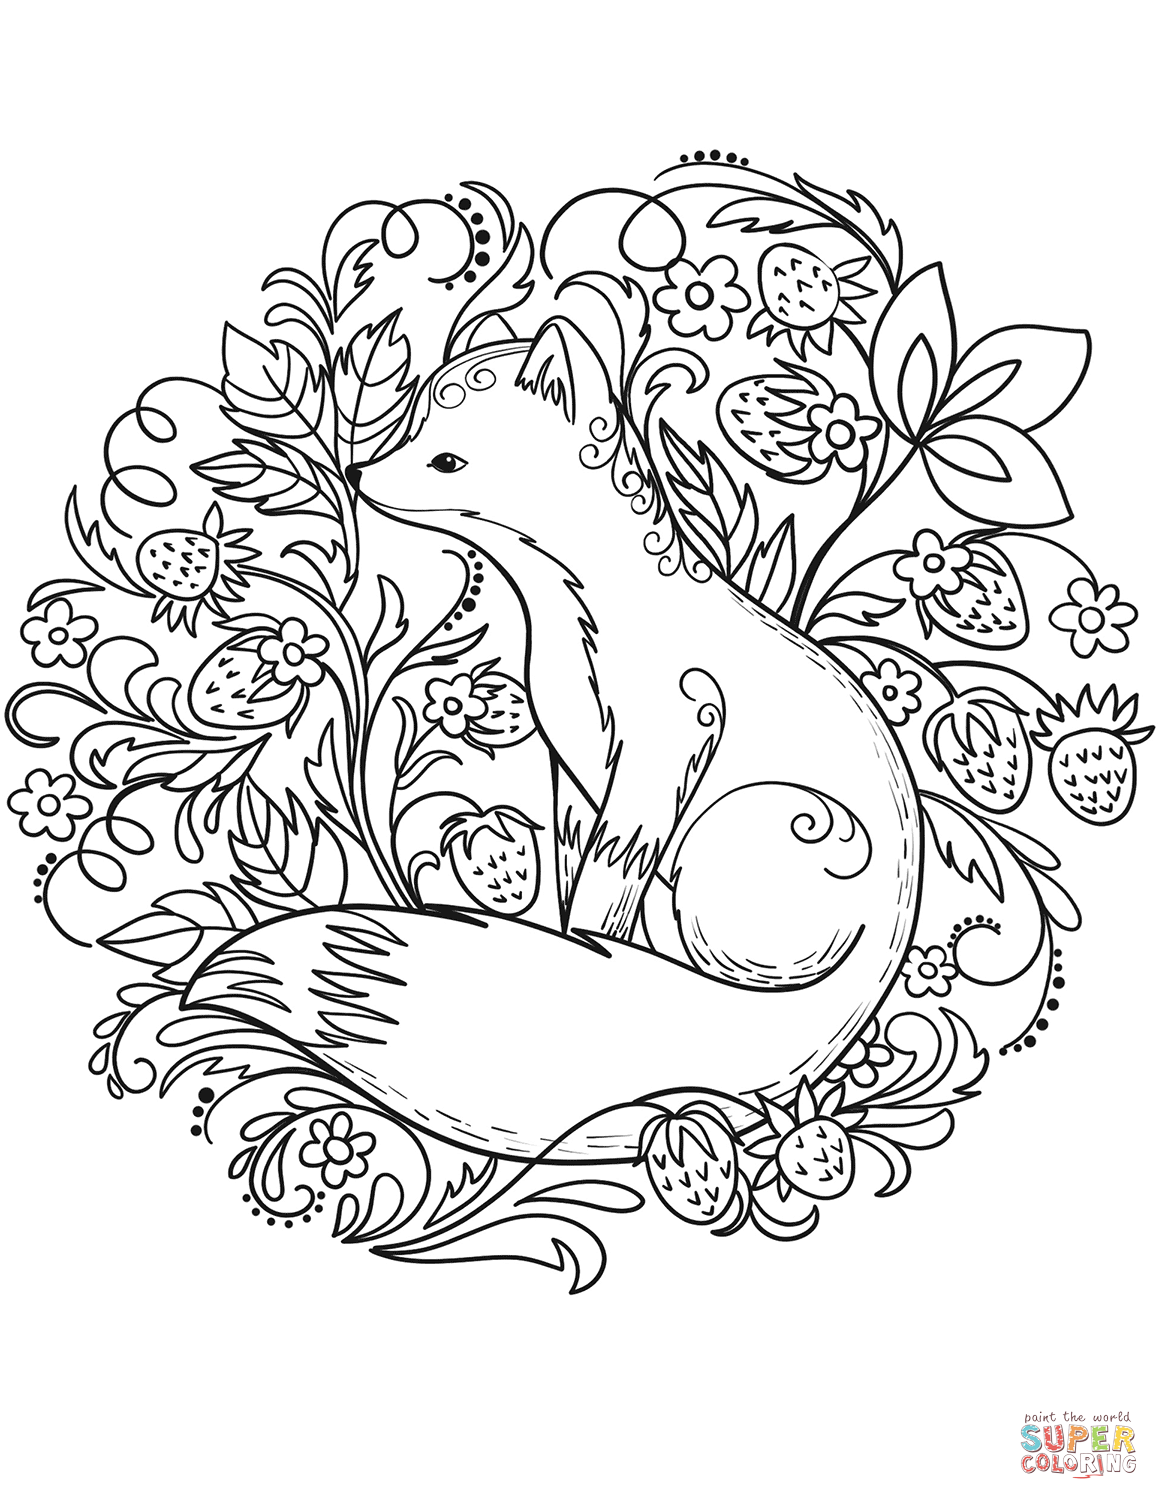 Cute Fox Coloring Pages Coloring Home